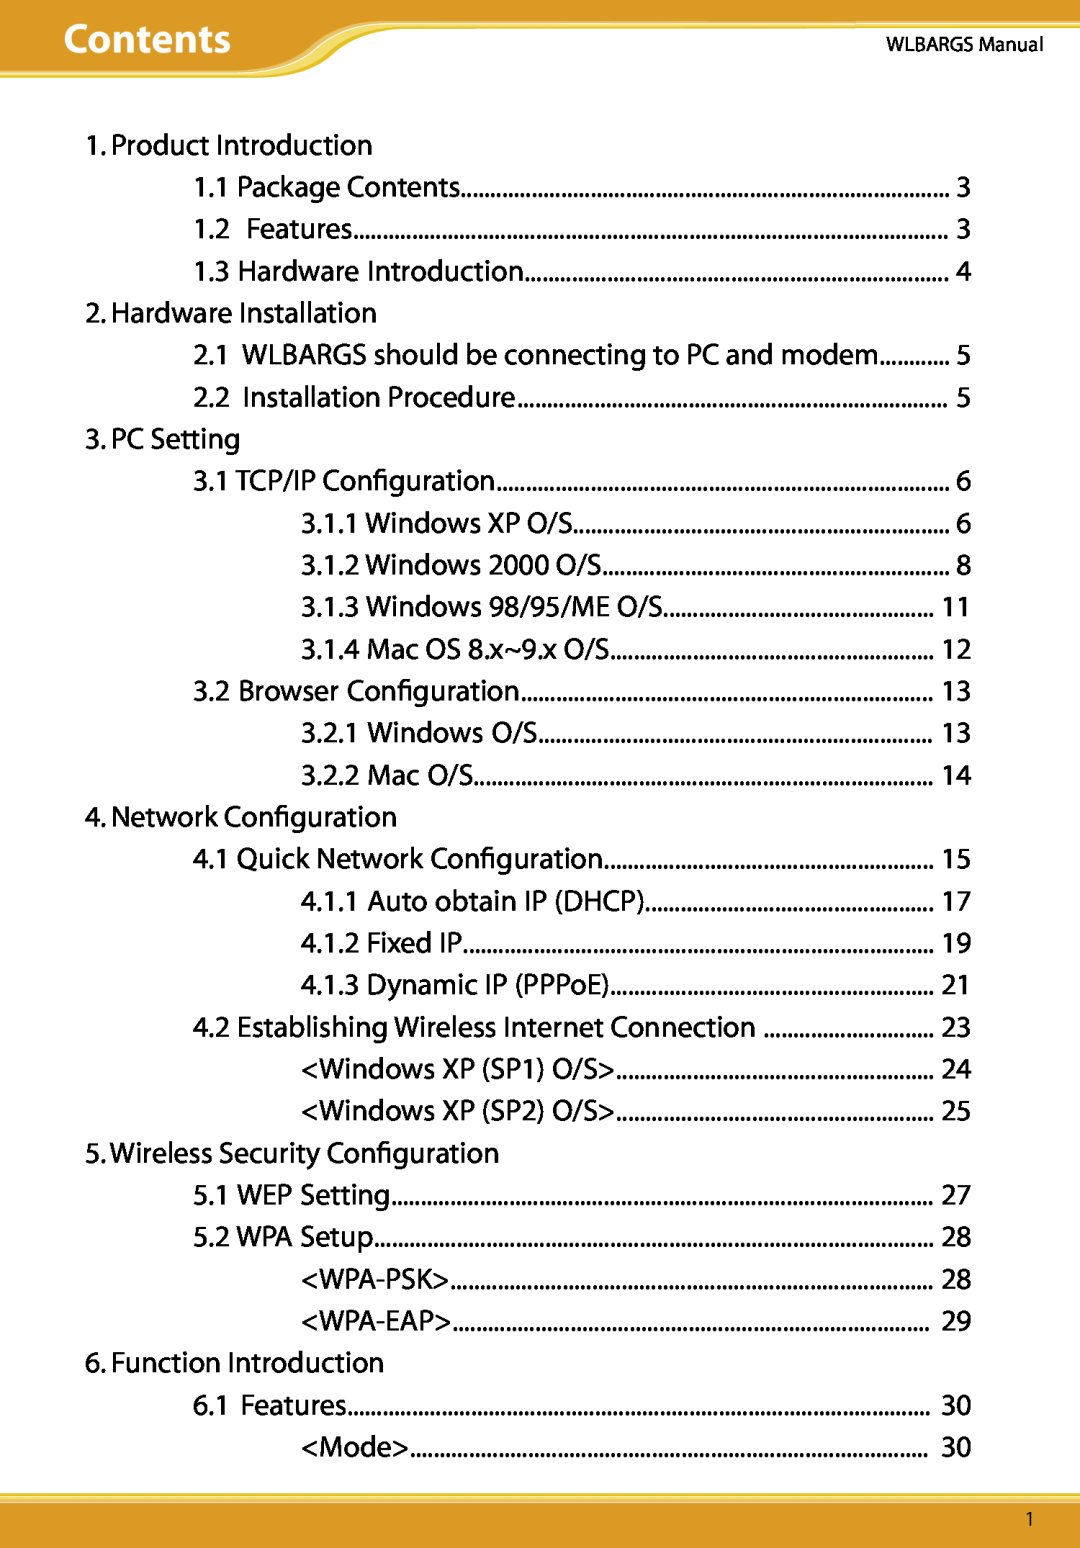 Allied Telesis CG-WLBARGS manual Contents, Product Introduction, Hardware Installation, PC Setting, Network Conﬁguration 